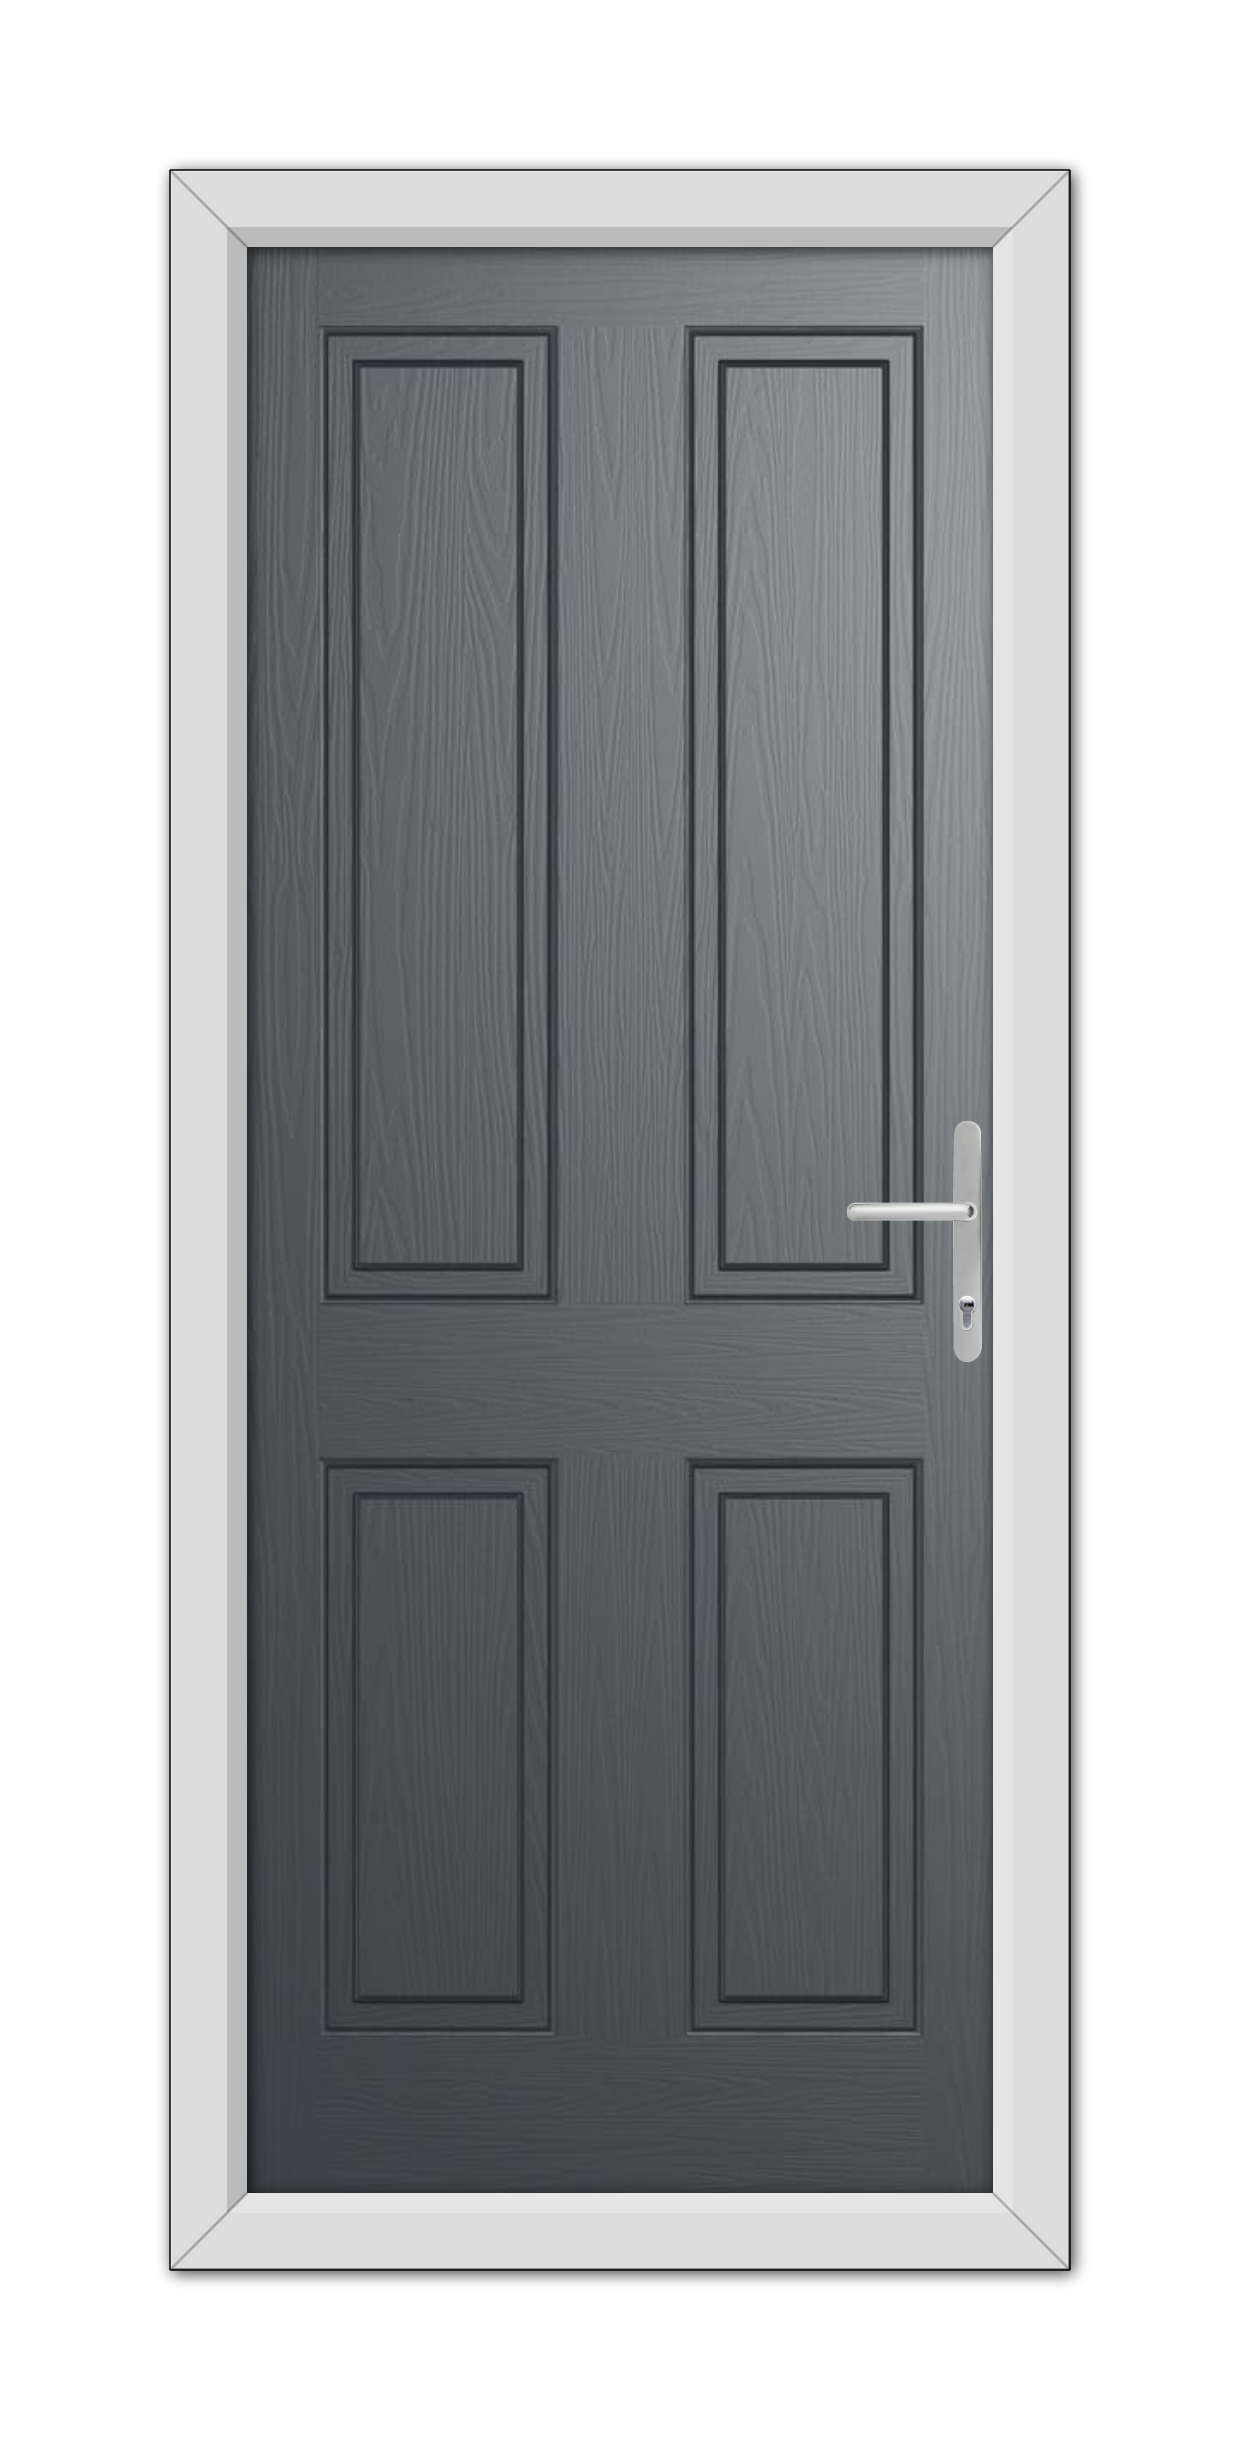 A modern Anthracite Grey Whitmore Solid Composite Door 48mm Timber Core with four panels and a silver handle, set within a white frame, depicted against a plain background.